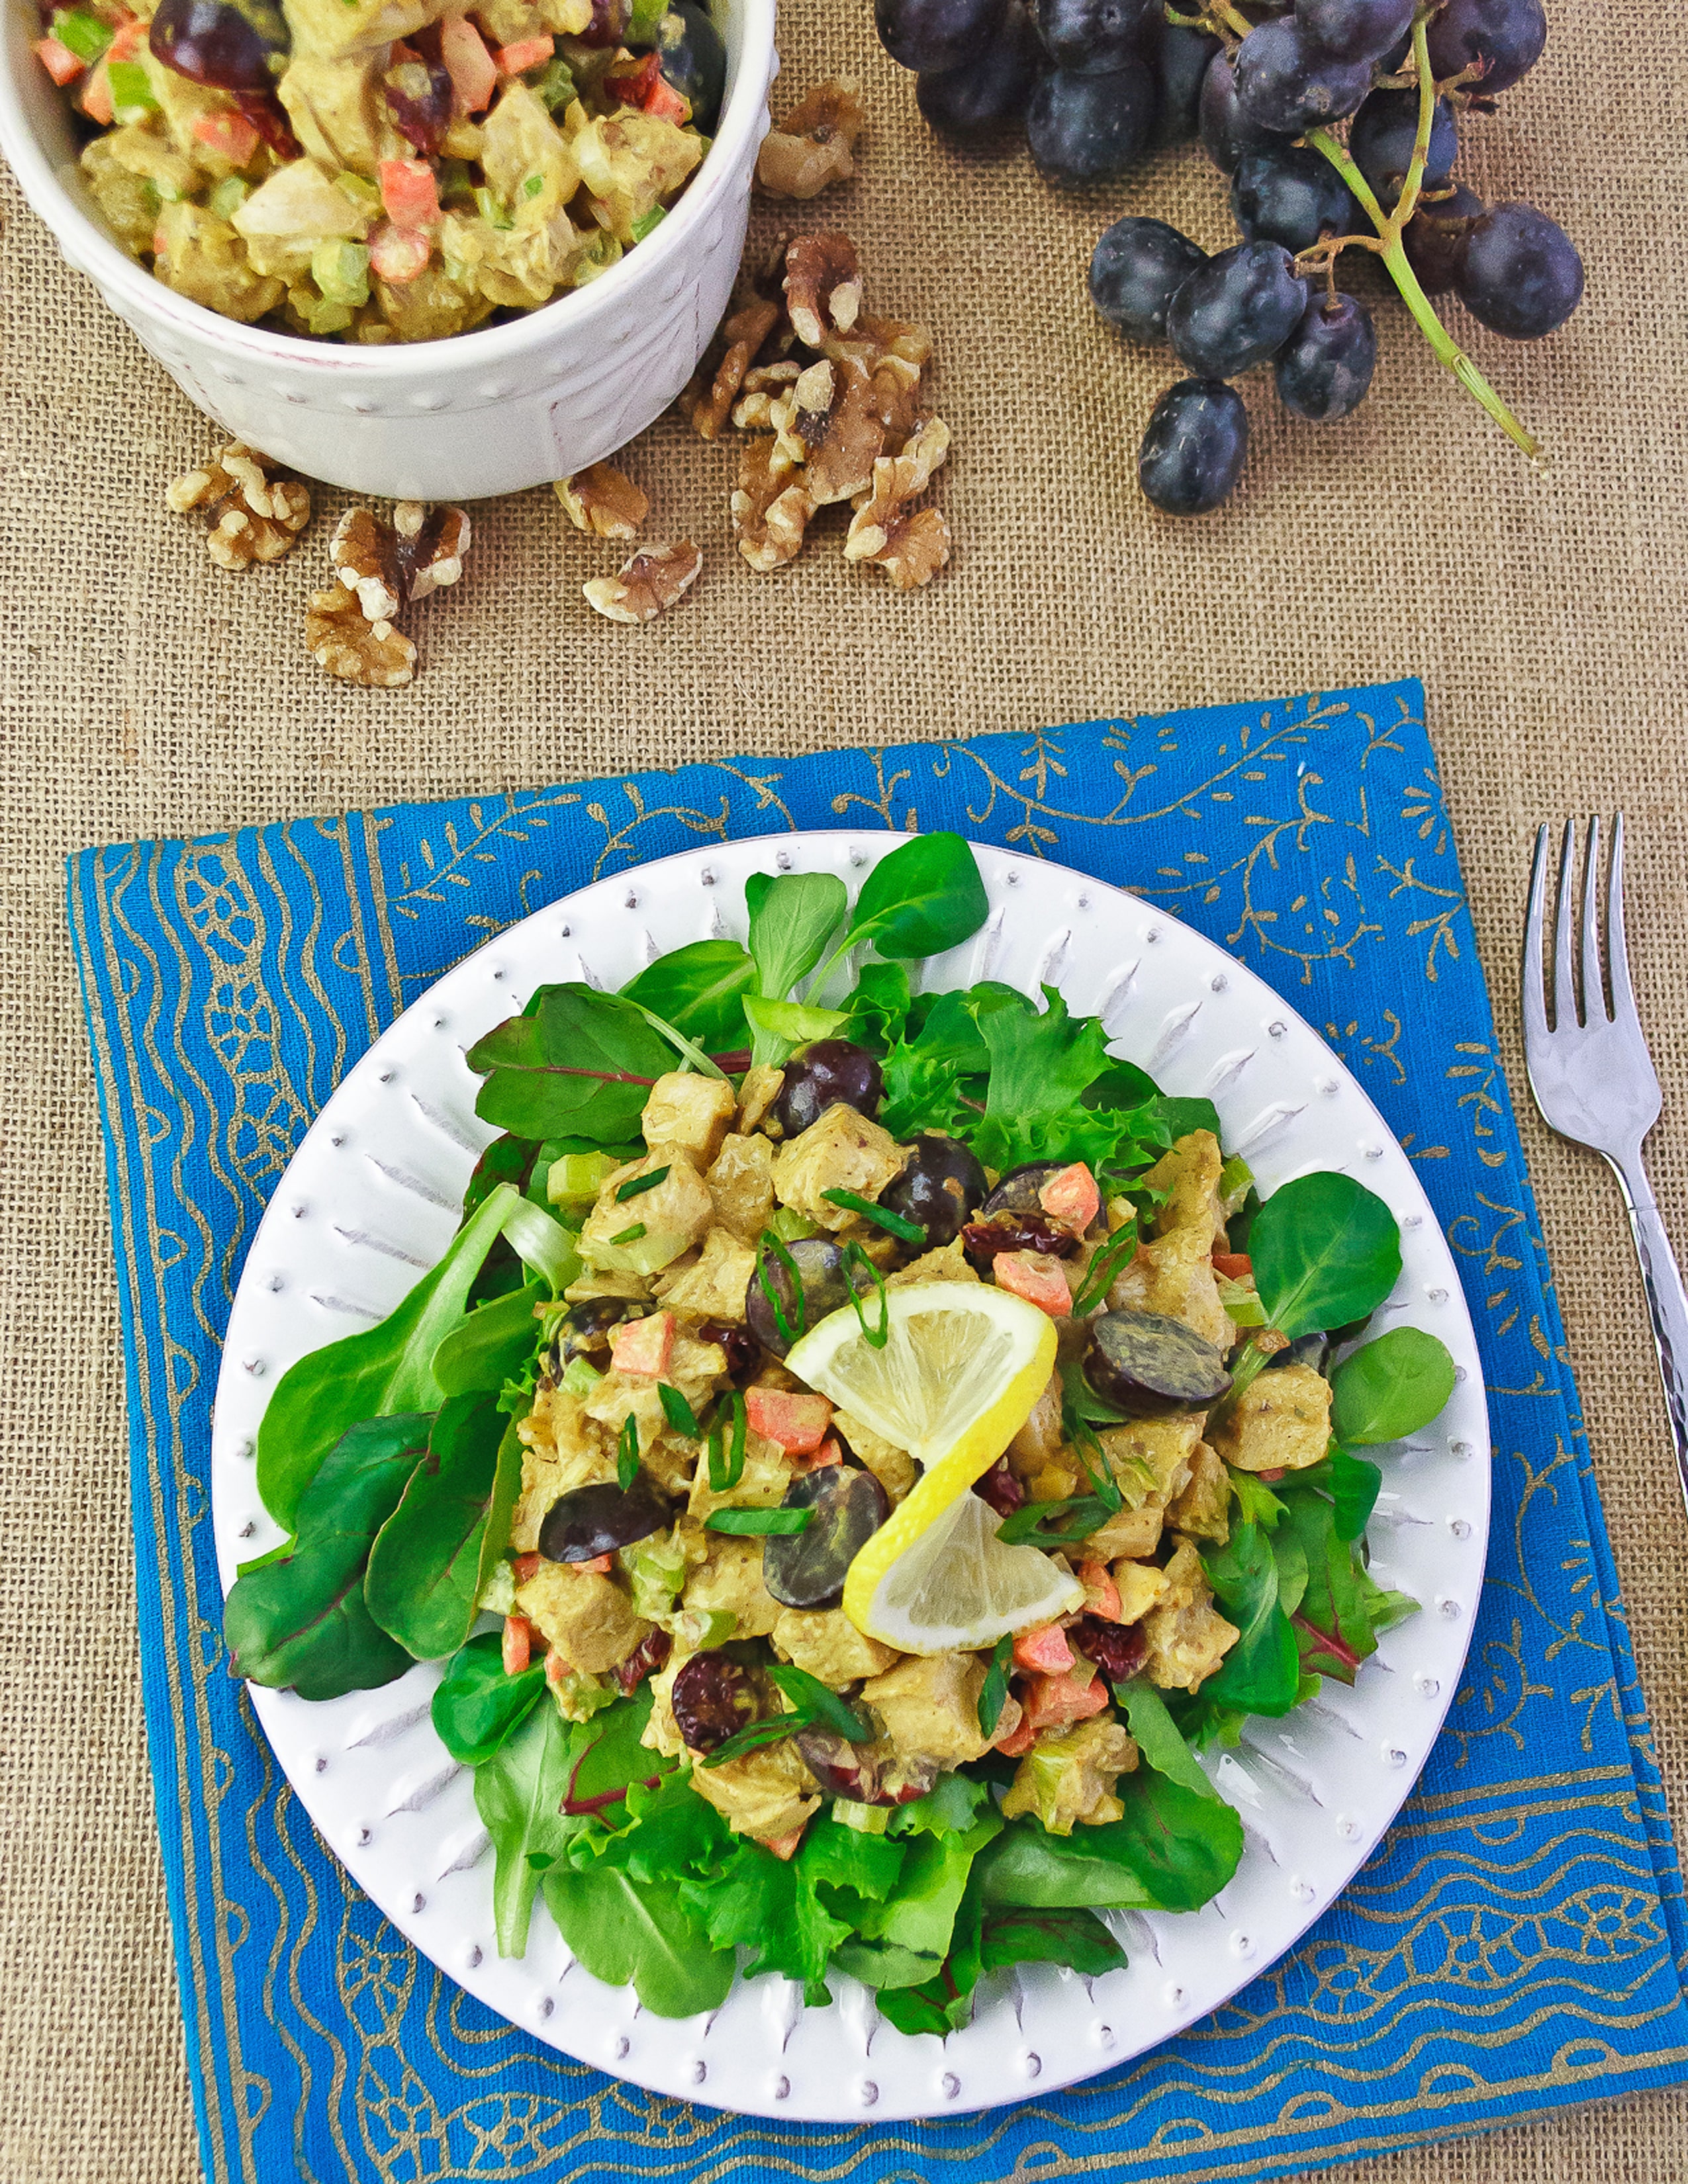 Curry Chicken Salad is a popular lunch or light dinner and can be served over lettuce or as sandwiches. A great light lunch recipe for bridal shower and baby shower buffet too!